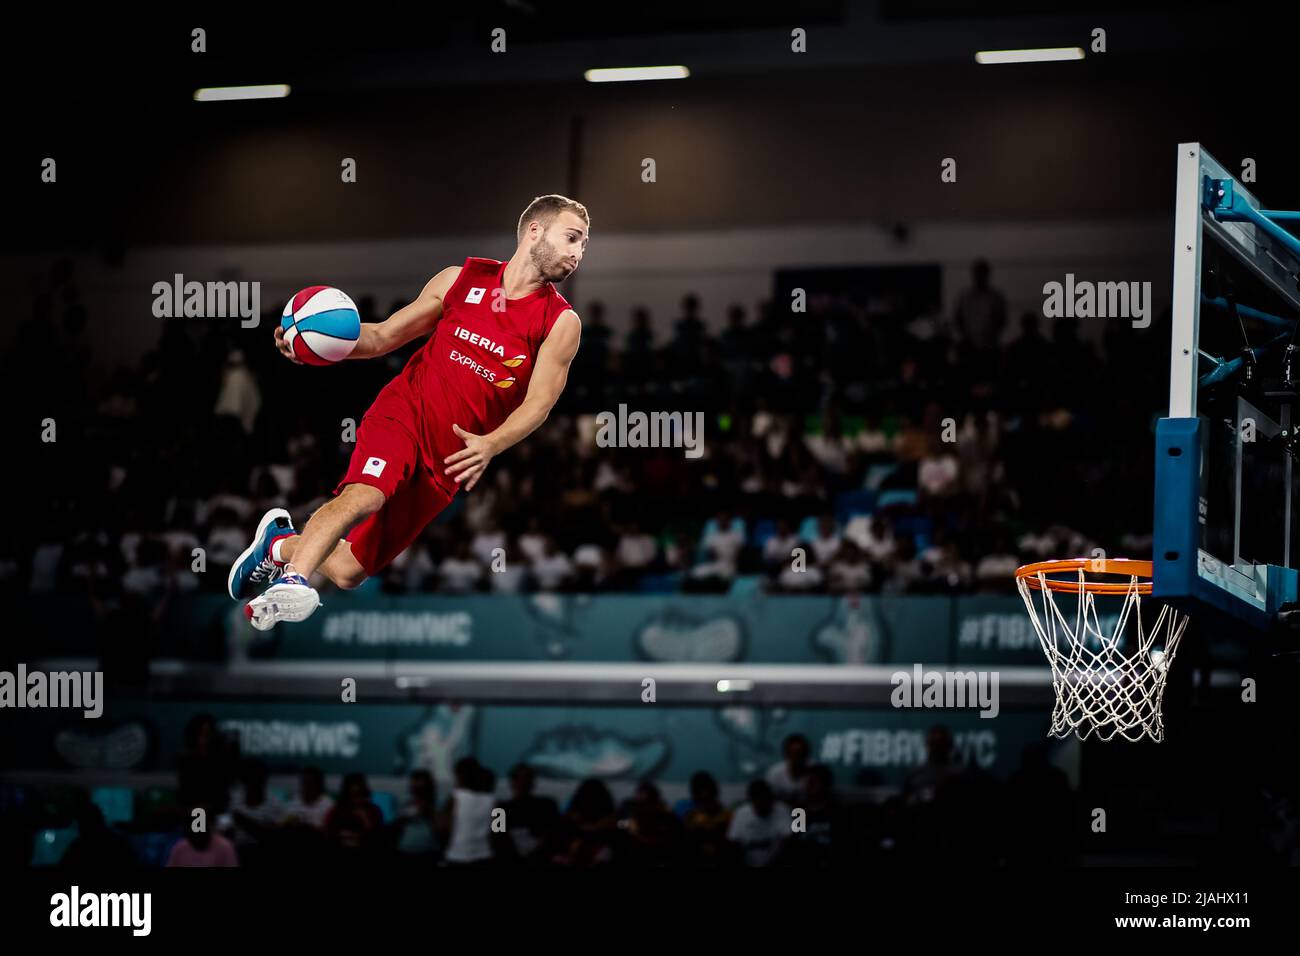 Tenerife, Spain, September 26, 2018:basketball player with ball in hands fly high during an acrobatic basketball show Stock Photo